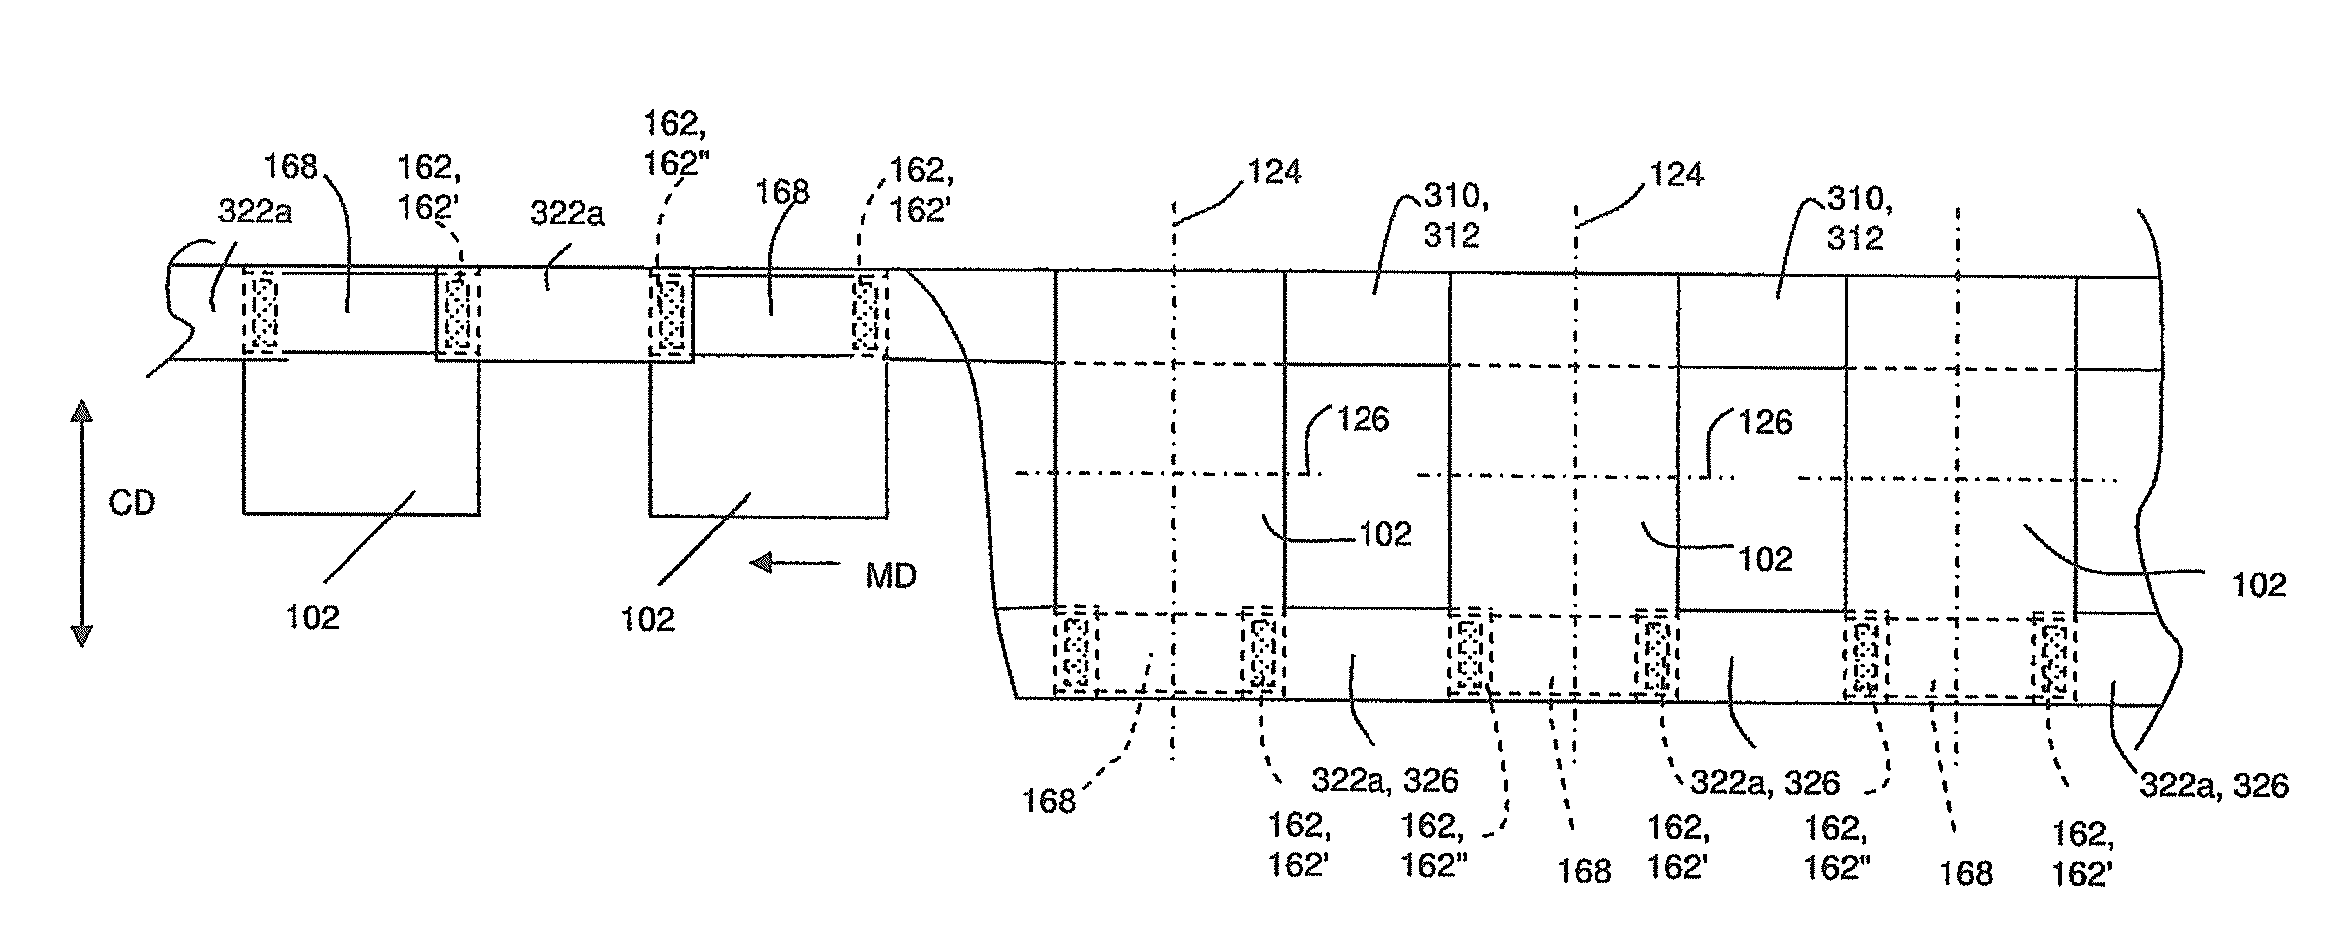 Method of Making Prefastened Refastenable Disposable Absorbent Articles